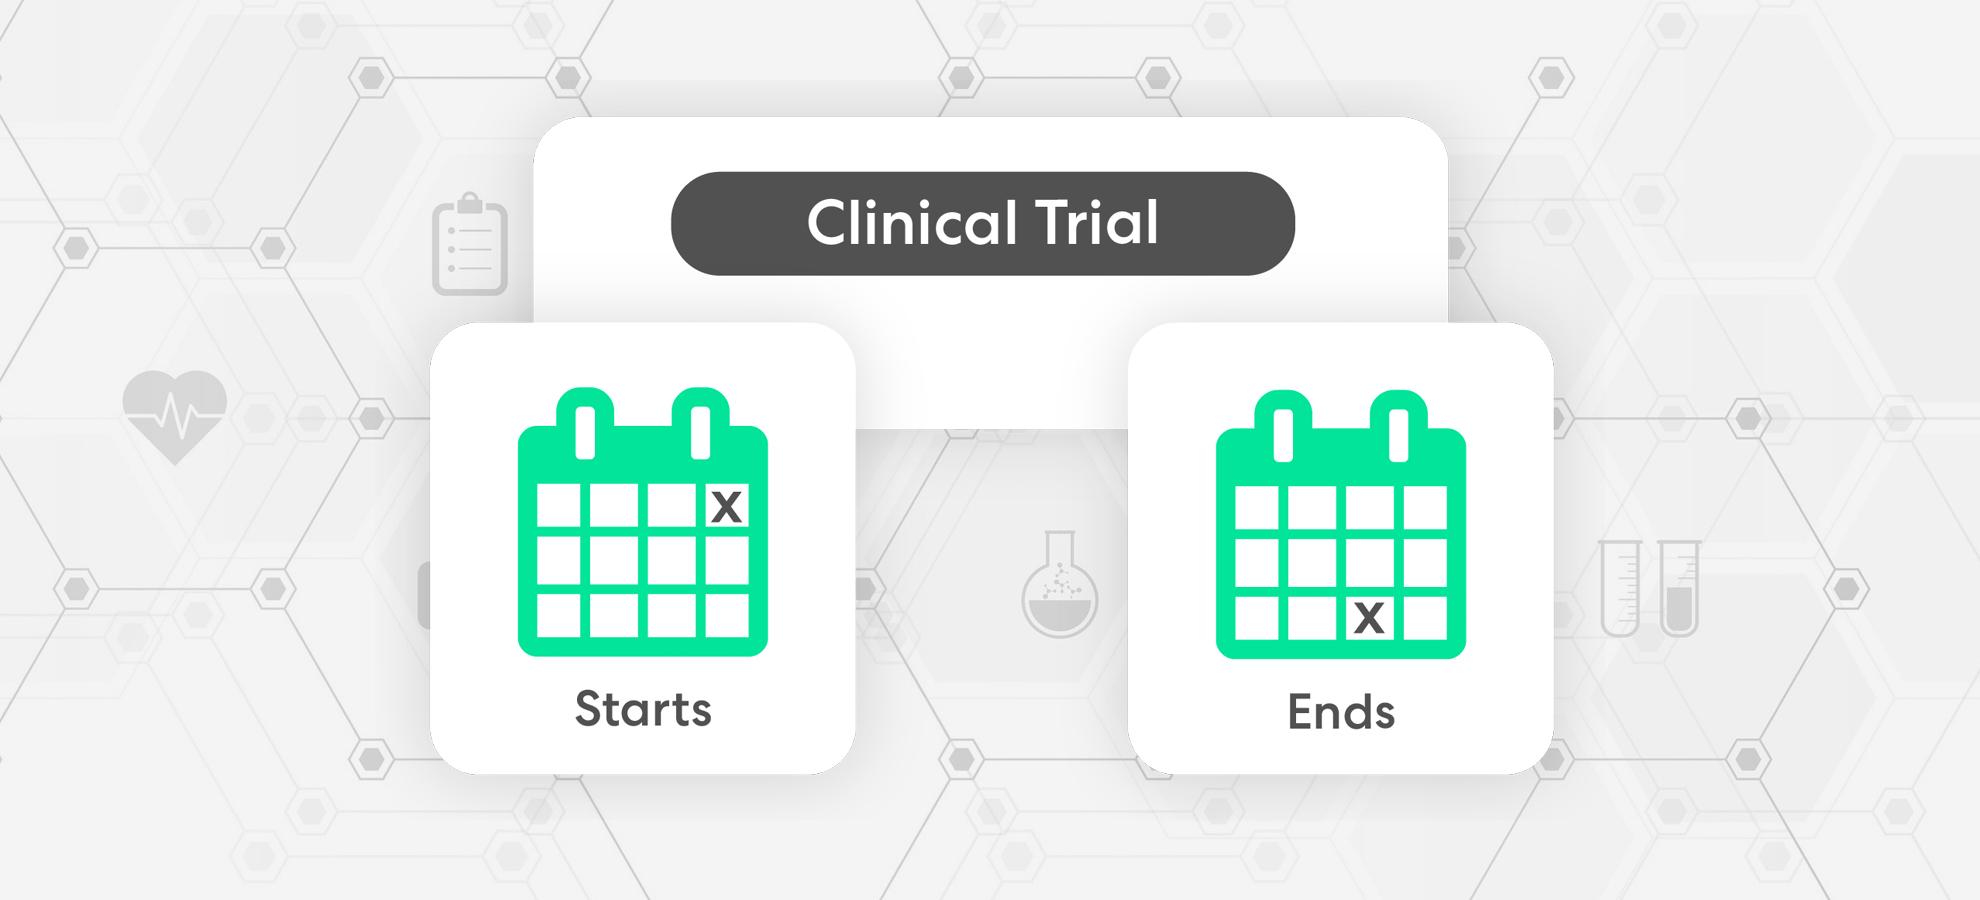 How long do clinical trials take?